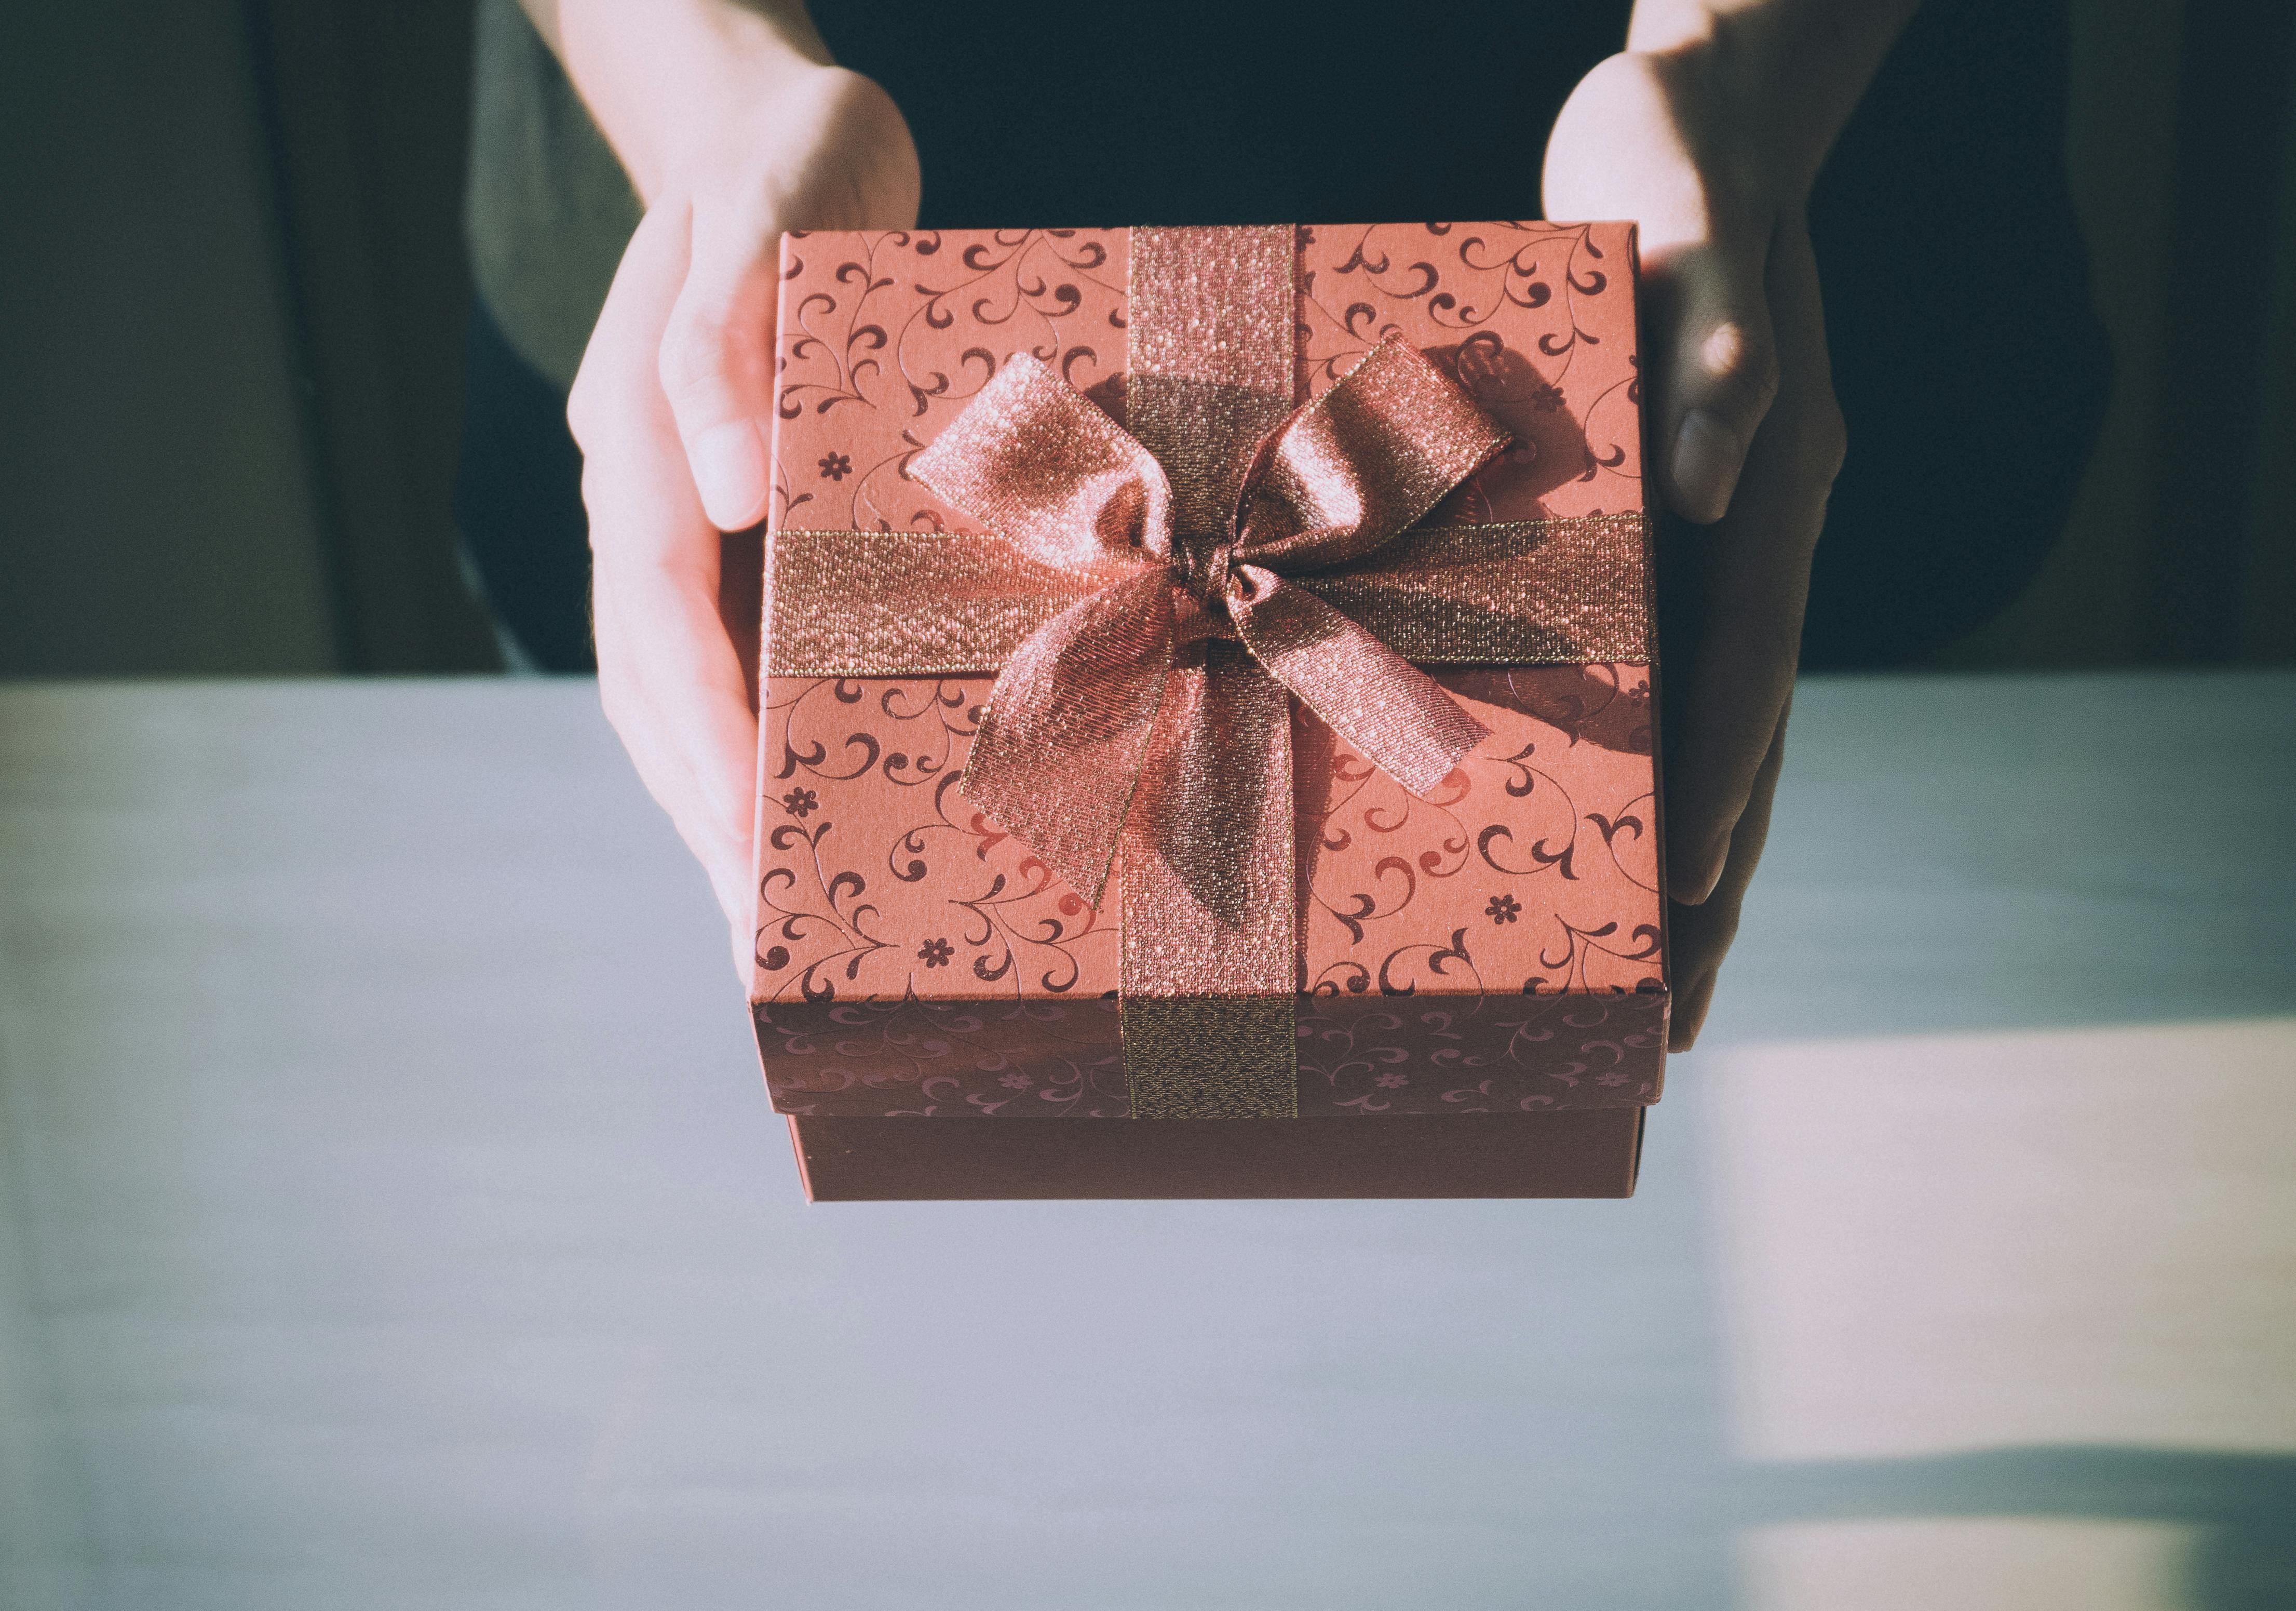 A wrapped box | Source: Pexels